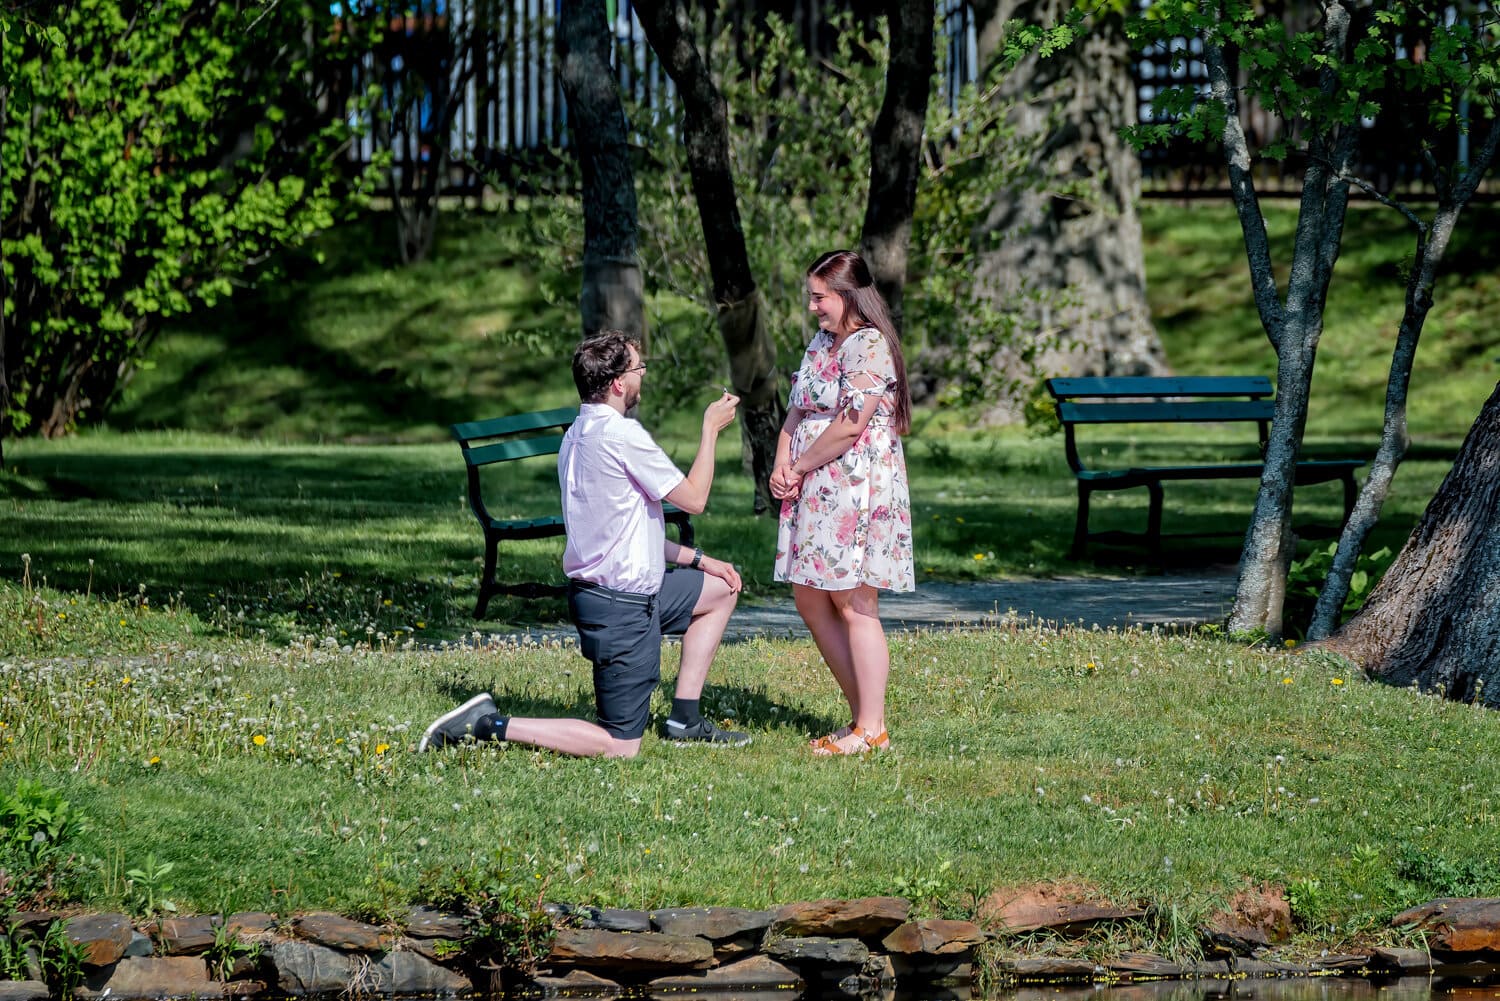 A boyfriend gets down on one knee and proposes marriage to his girlfriend during a walk in the Halifax Public Gardens in Nova Scotia.